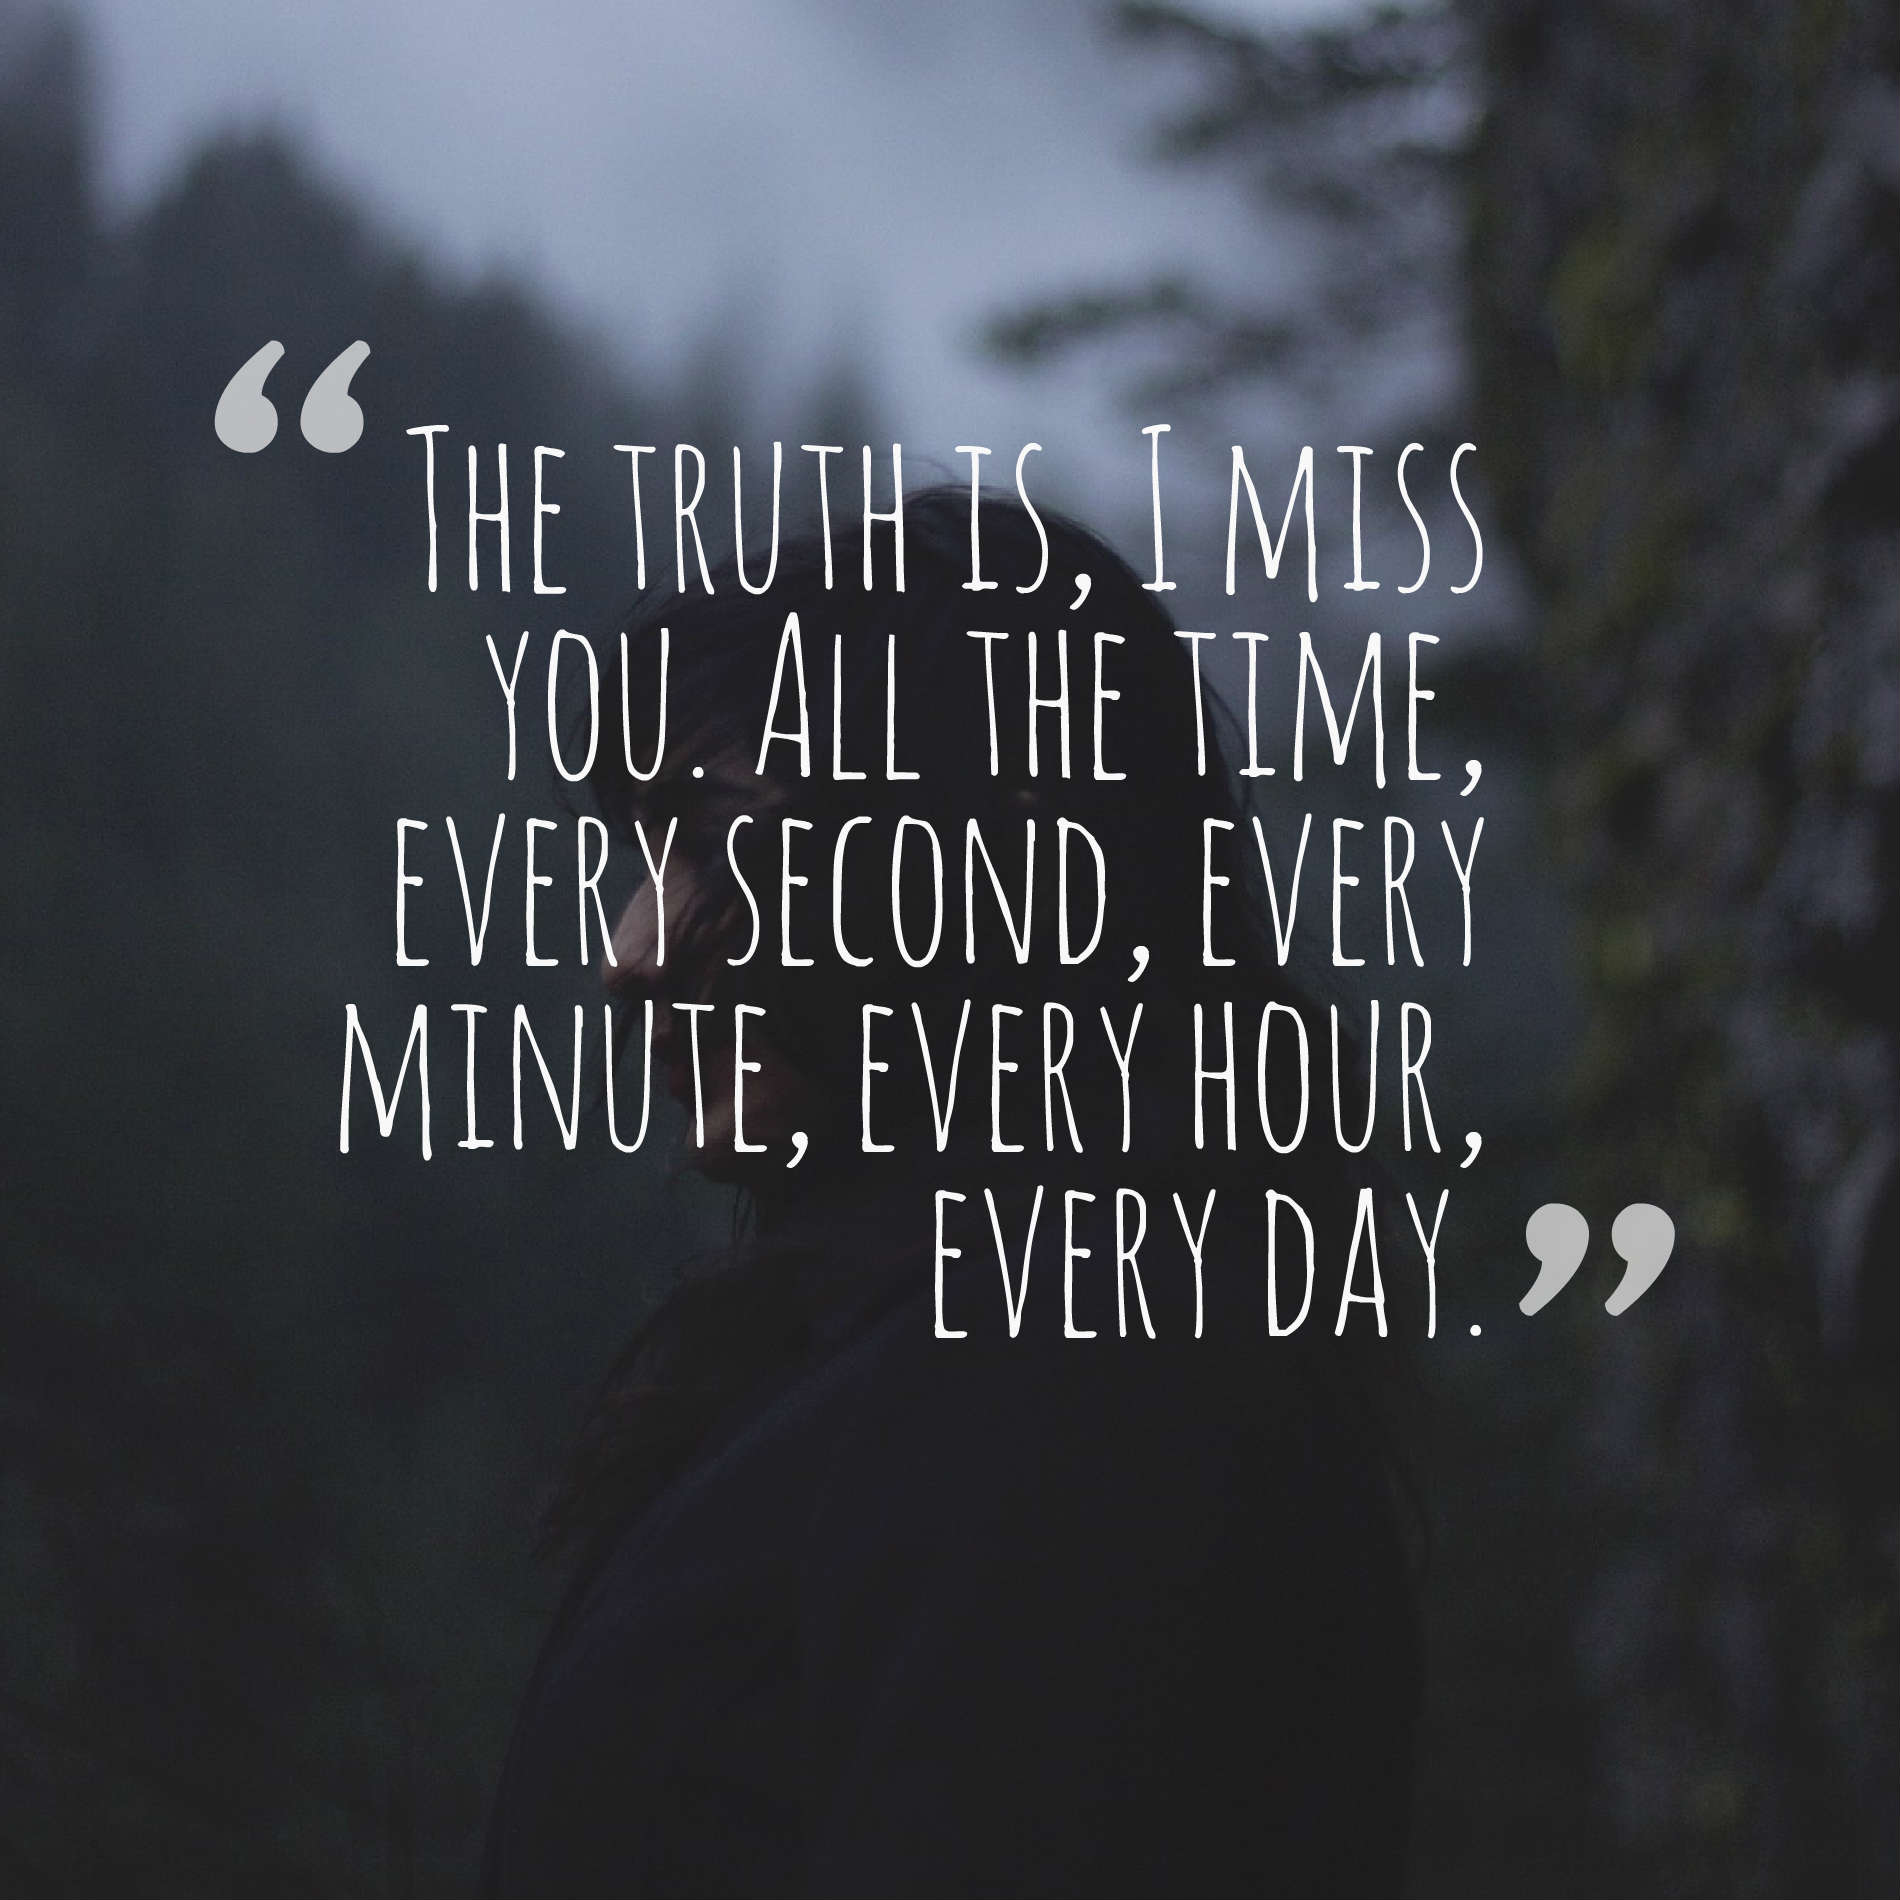 The truth is, I miss you. All the time, every second, every minute, every hour, every day.